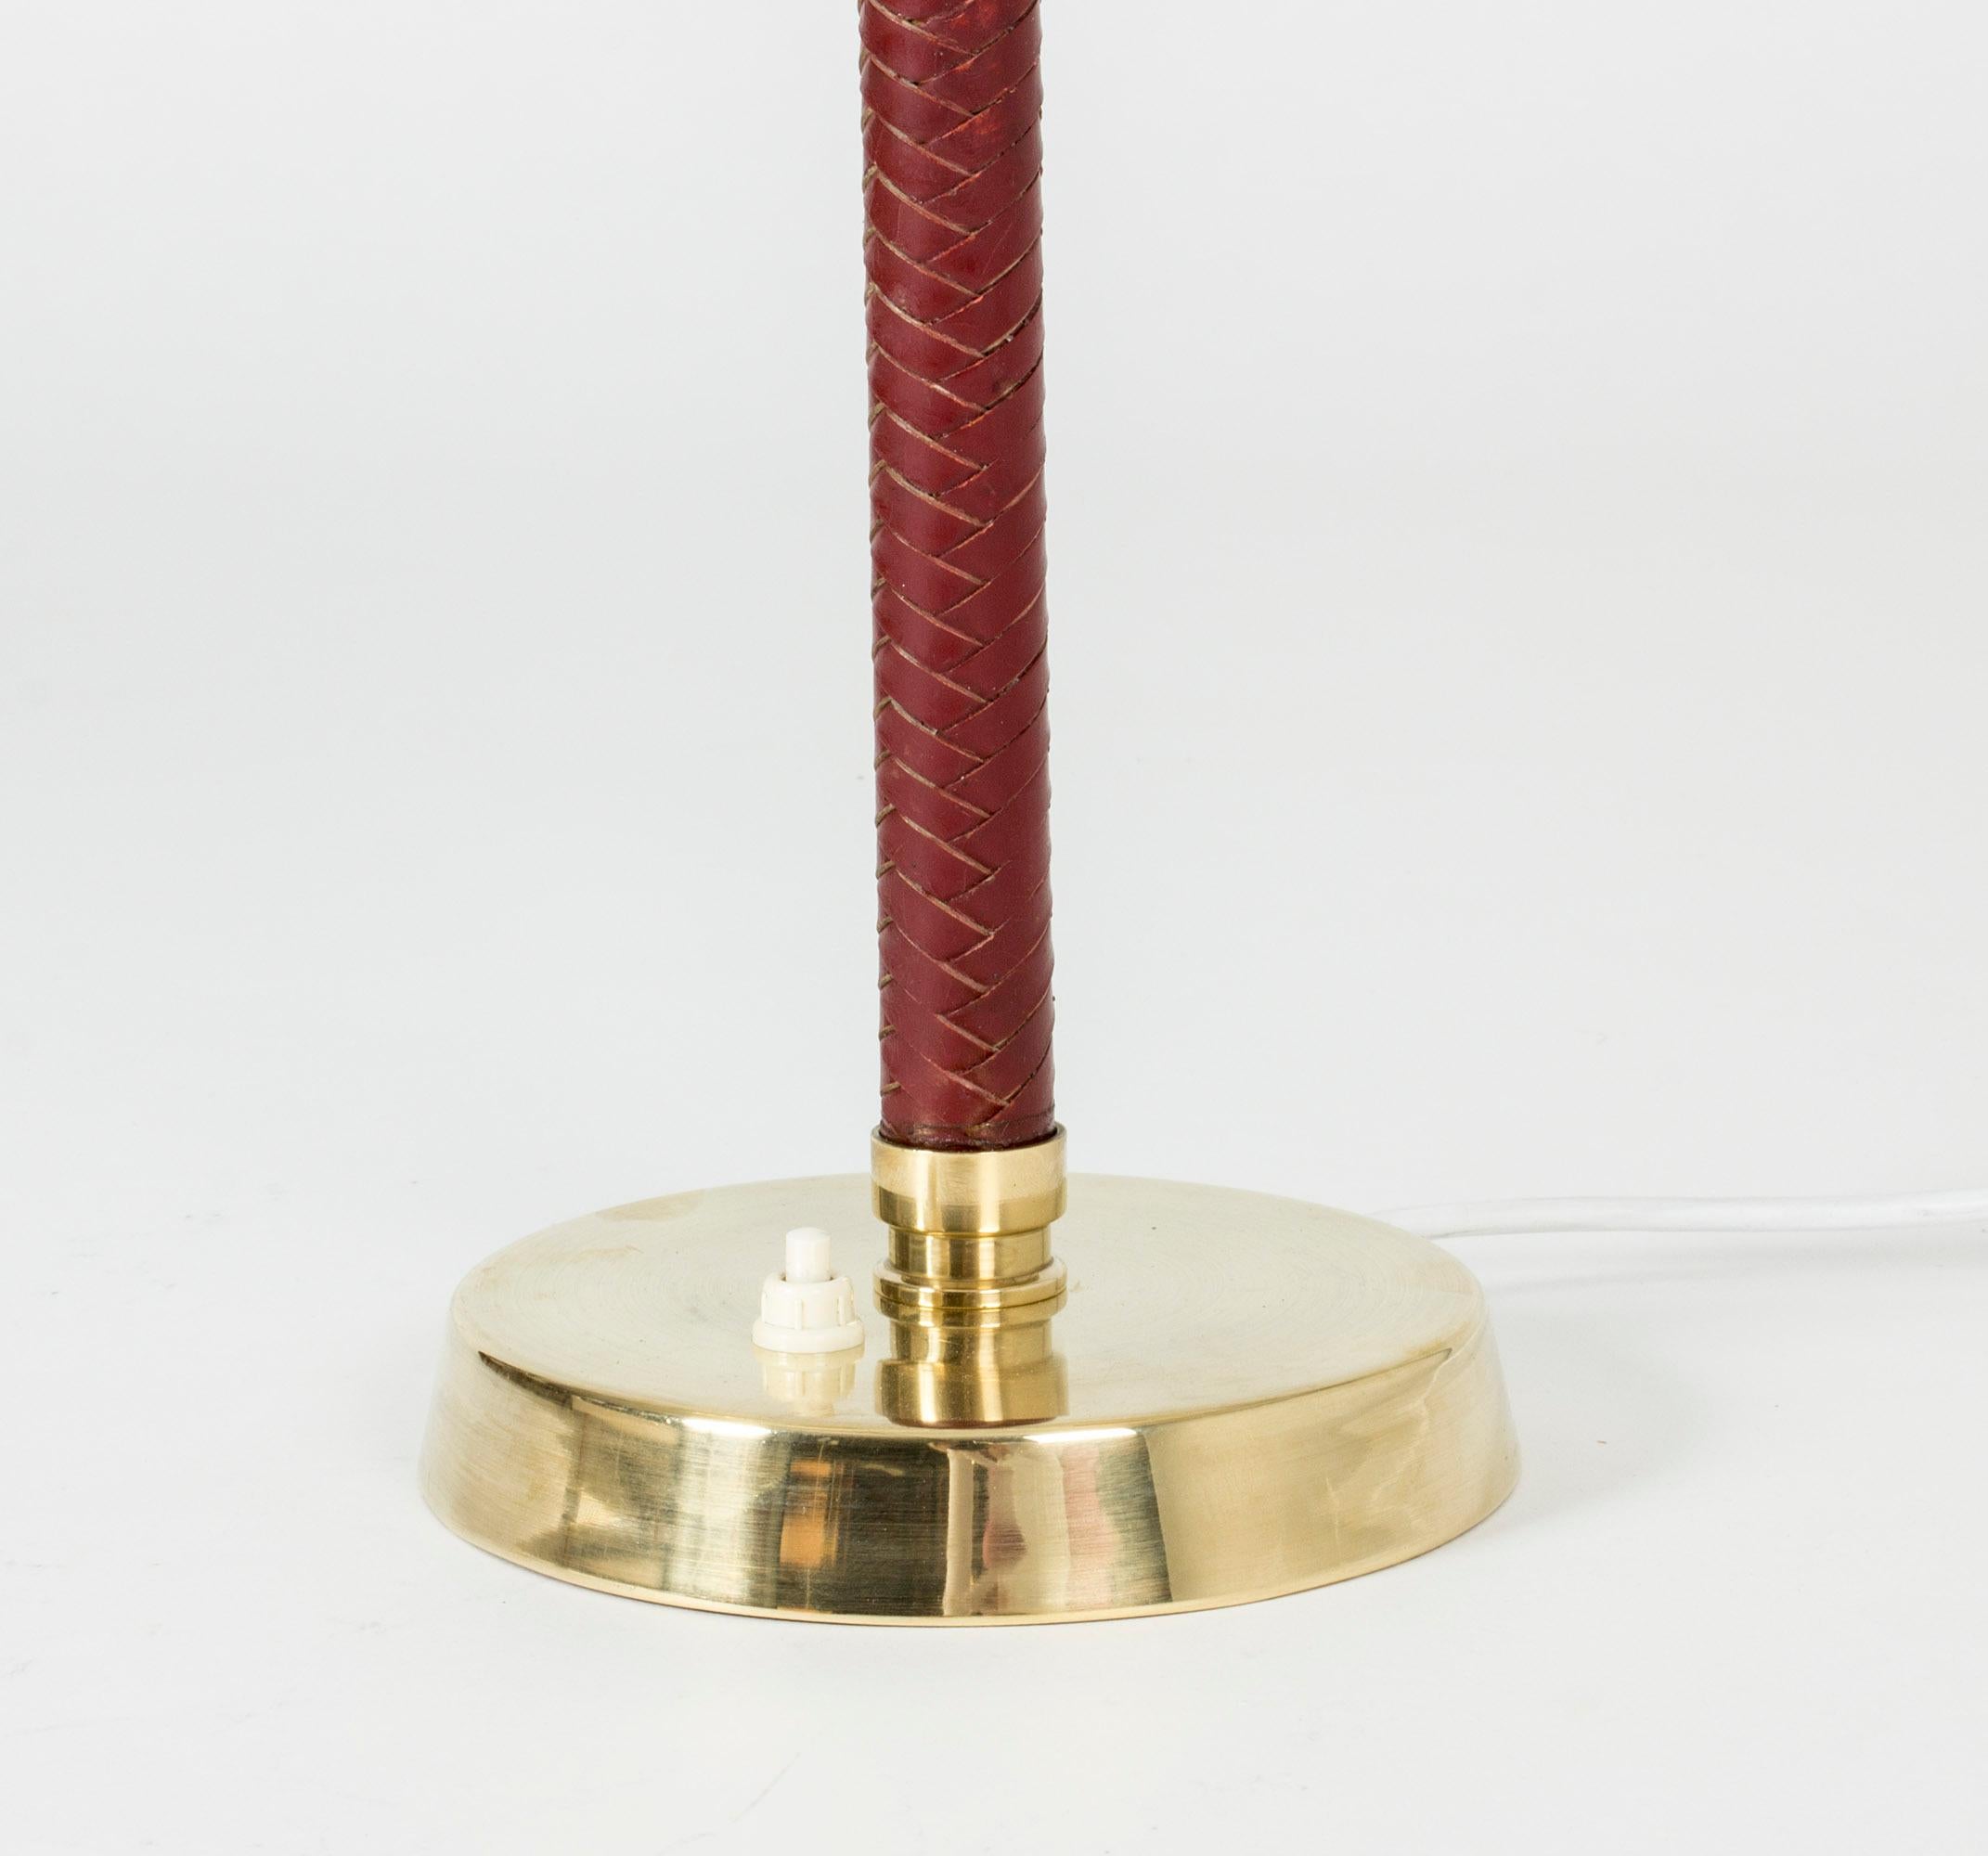 Brass Wreathed Leather Table Lamp from Karlskrona Lampfabrik